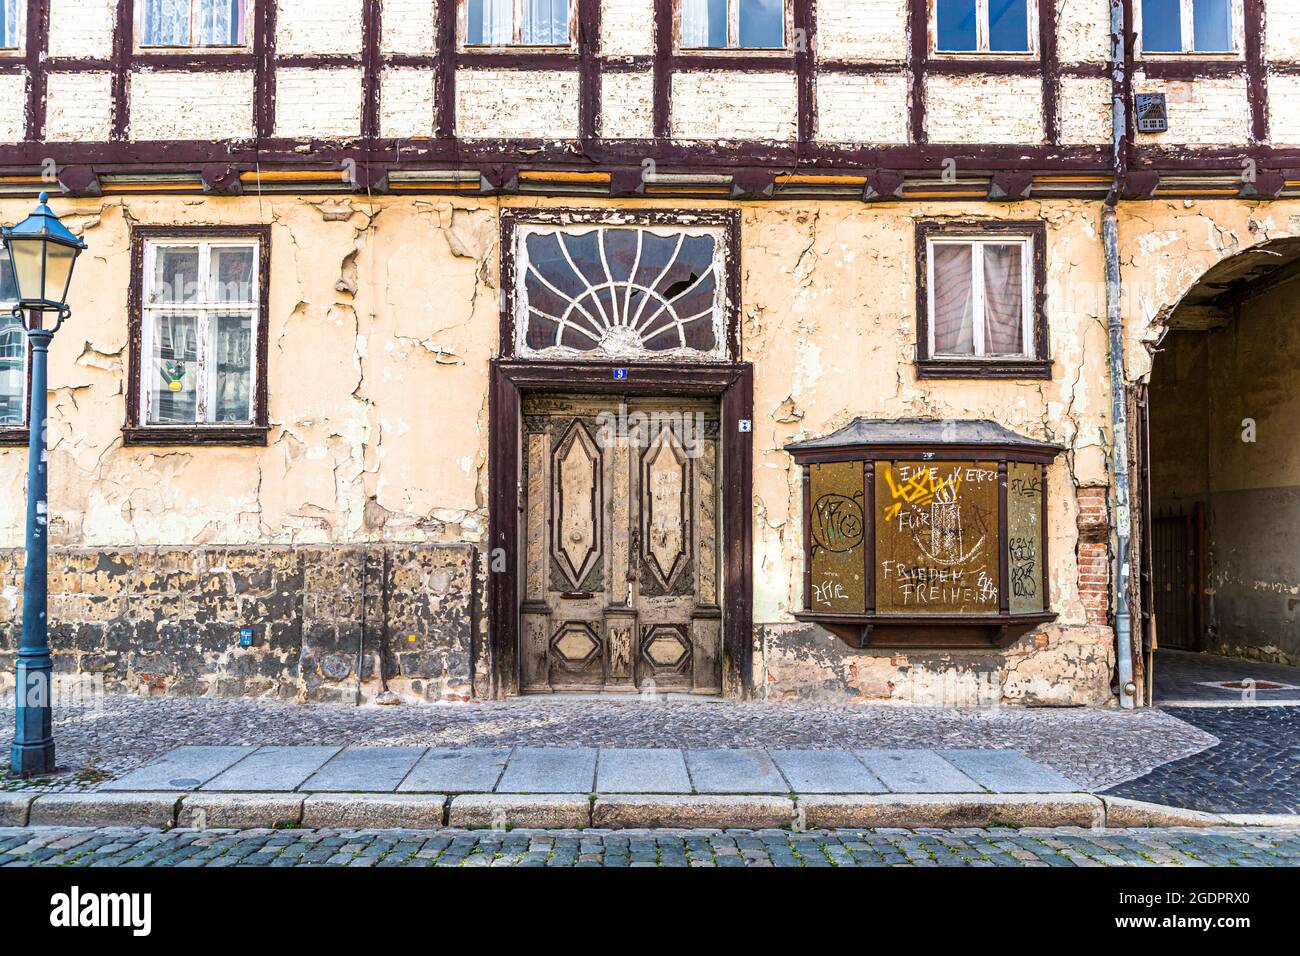 Dilapidated half-timbered house in Quedlinburg, Germany Stock Photo